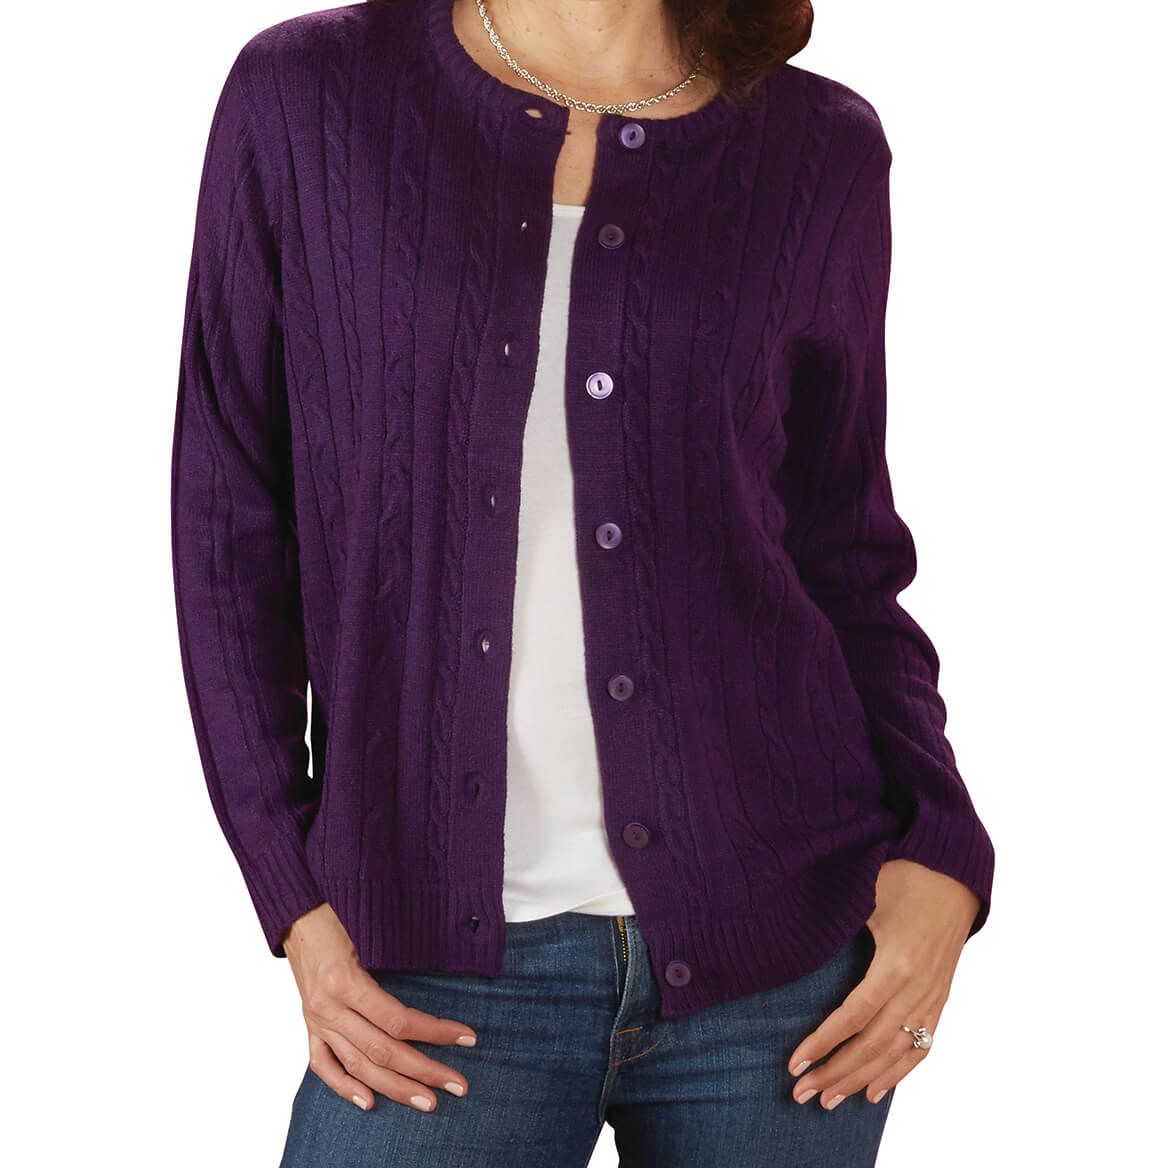 Women's Cable Knit Cardigan + '-' + 374843